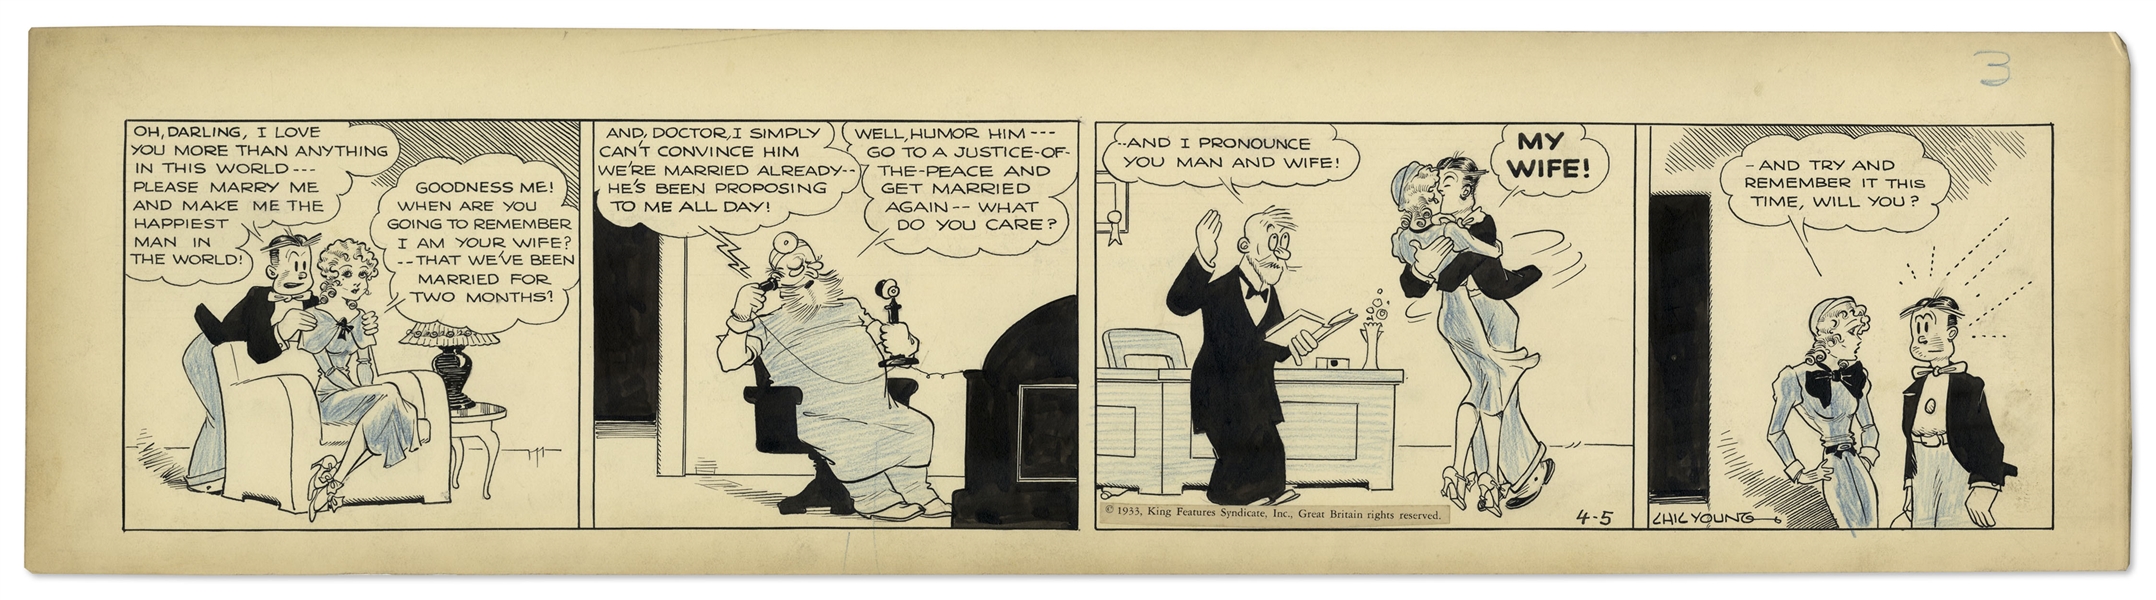 Chic Young Hand-Drawn ''Blondie'' Comic Strip From 1933 Titled ''Another Not To Be Forgotten Day'' -- Dagwood & Blondie Get Married Again in Front of a Justice of the Peace